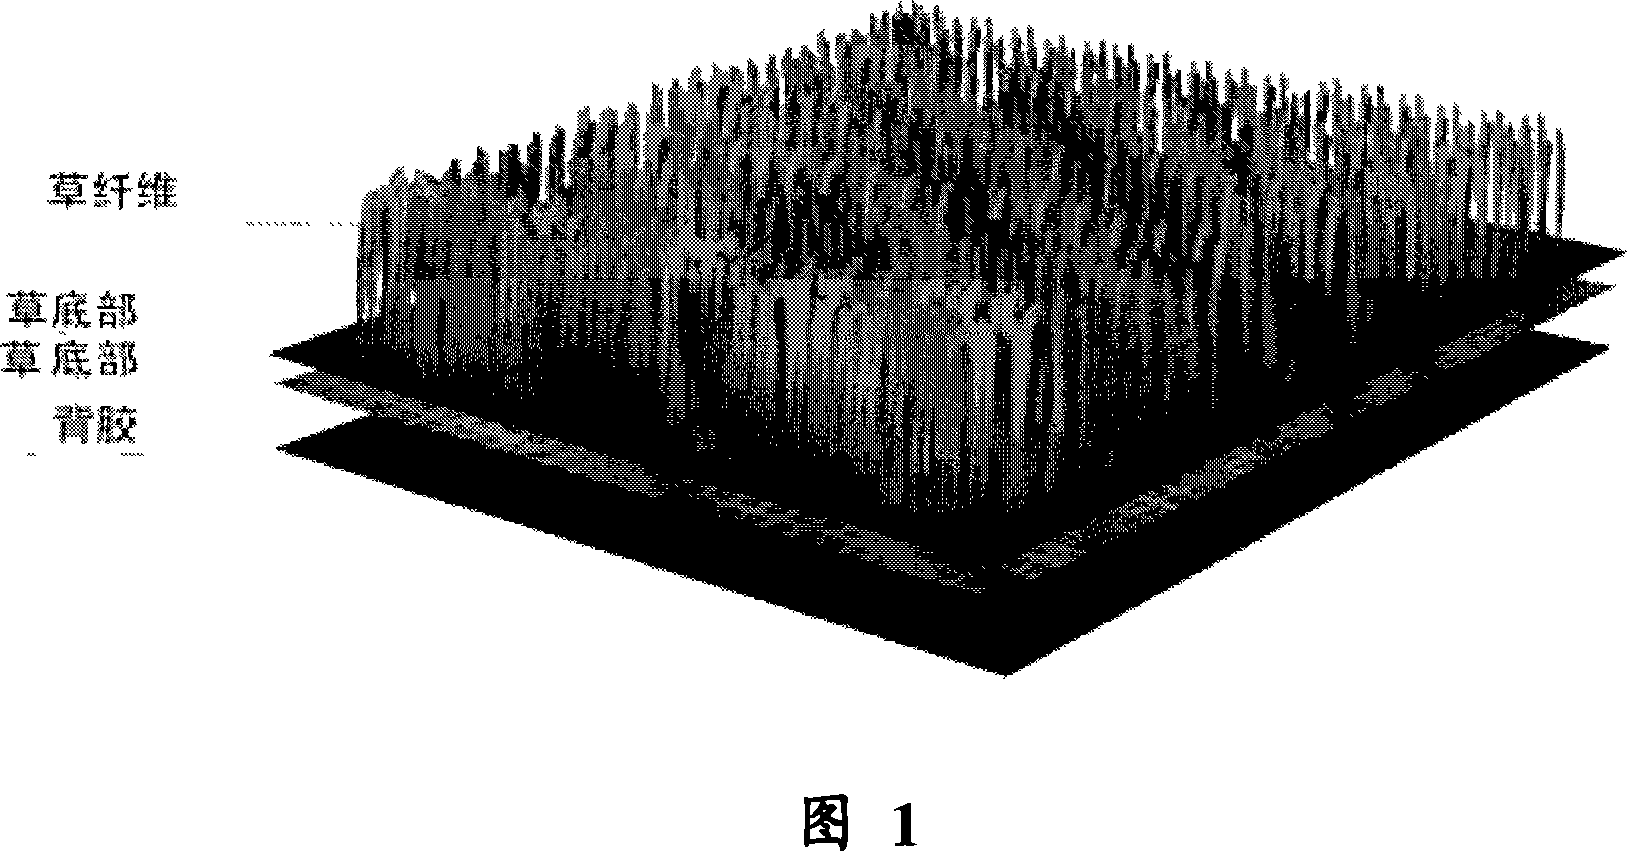 Novel synthetic turf and method for producing the same